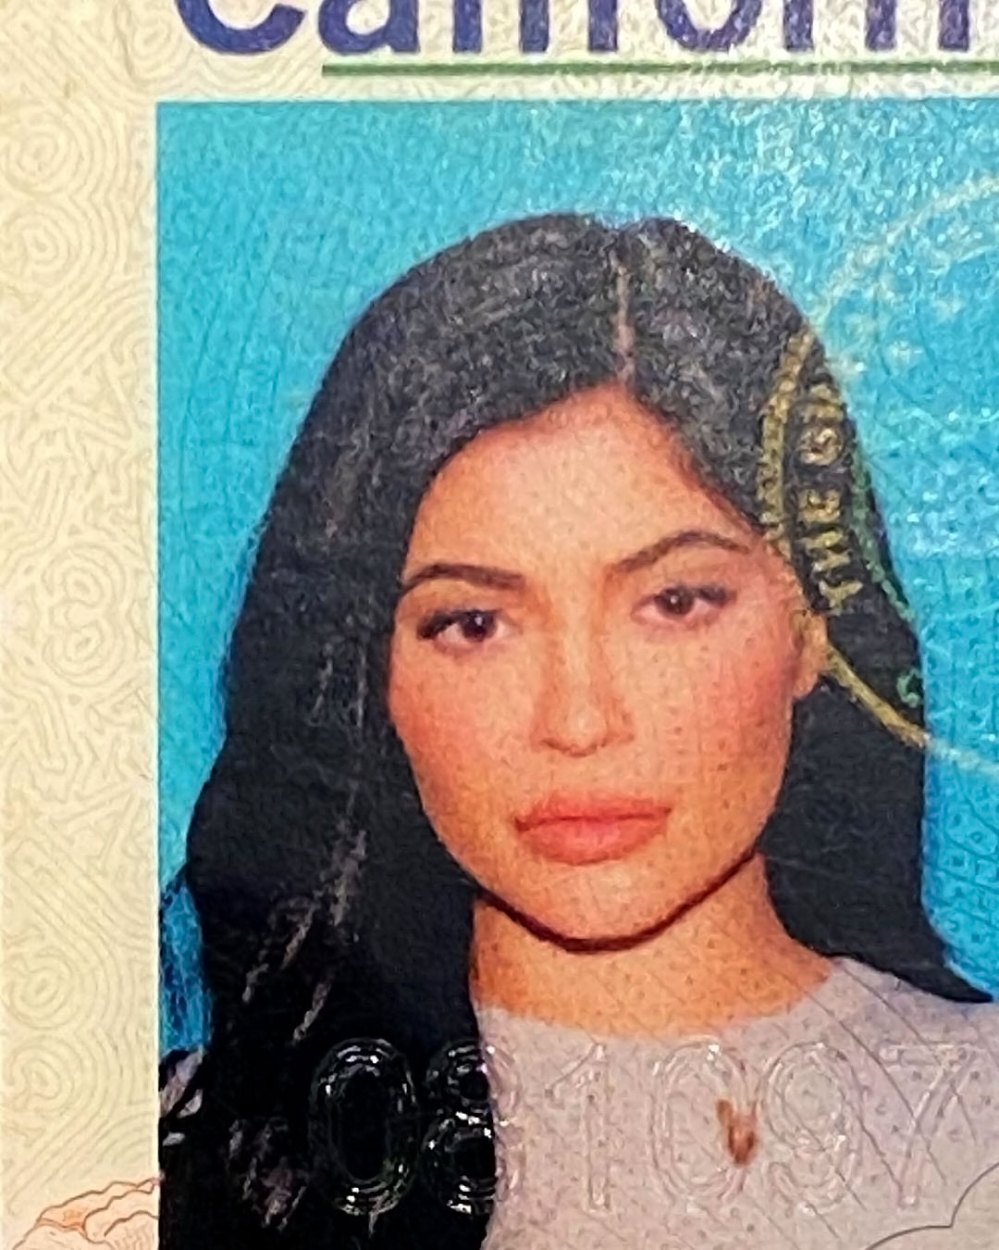 Kylie Jenner Flawless Driver License Photo Causing Quite a Stir